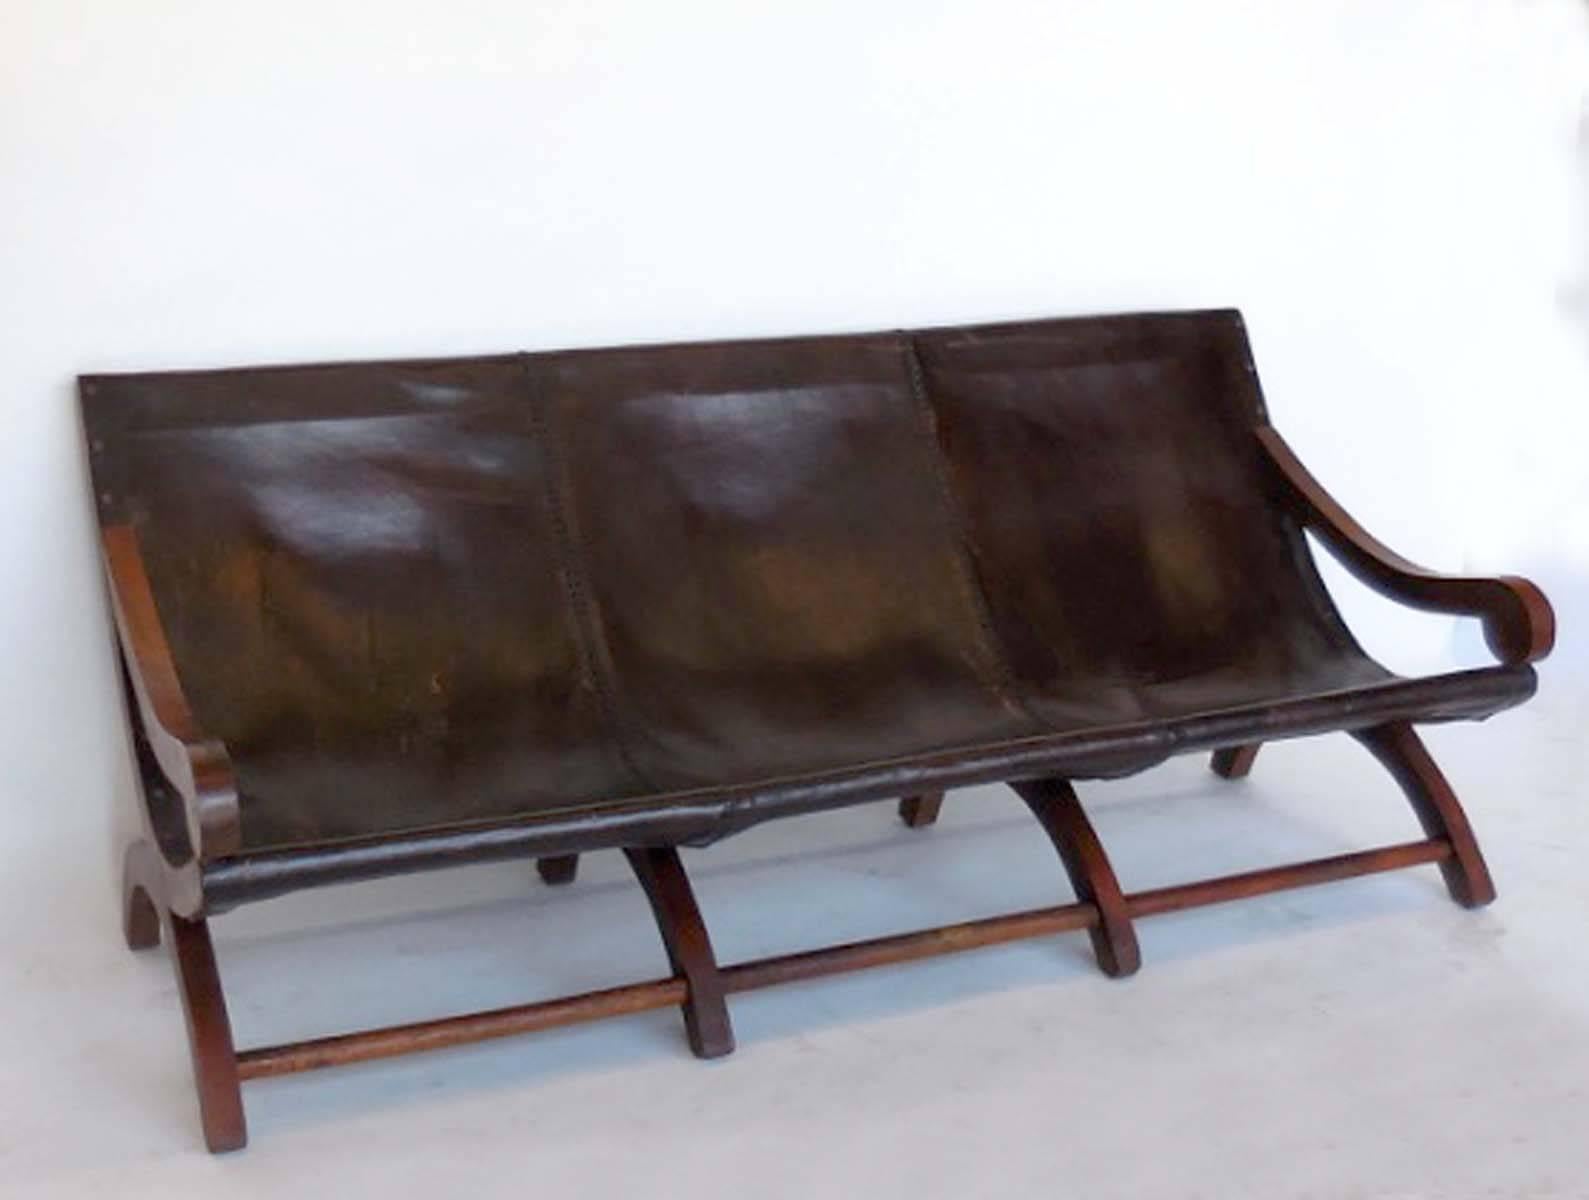 Terrific looking leather butaque/butaca sling sofa in the style of Luis Barragan, Made in Mexico in the 1970s. In great condition, some wear on leather, but completely sturdy and functional. Priced individually. ONLY ONE AVAILABLE!